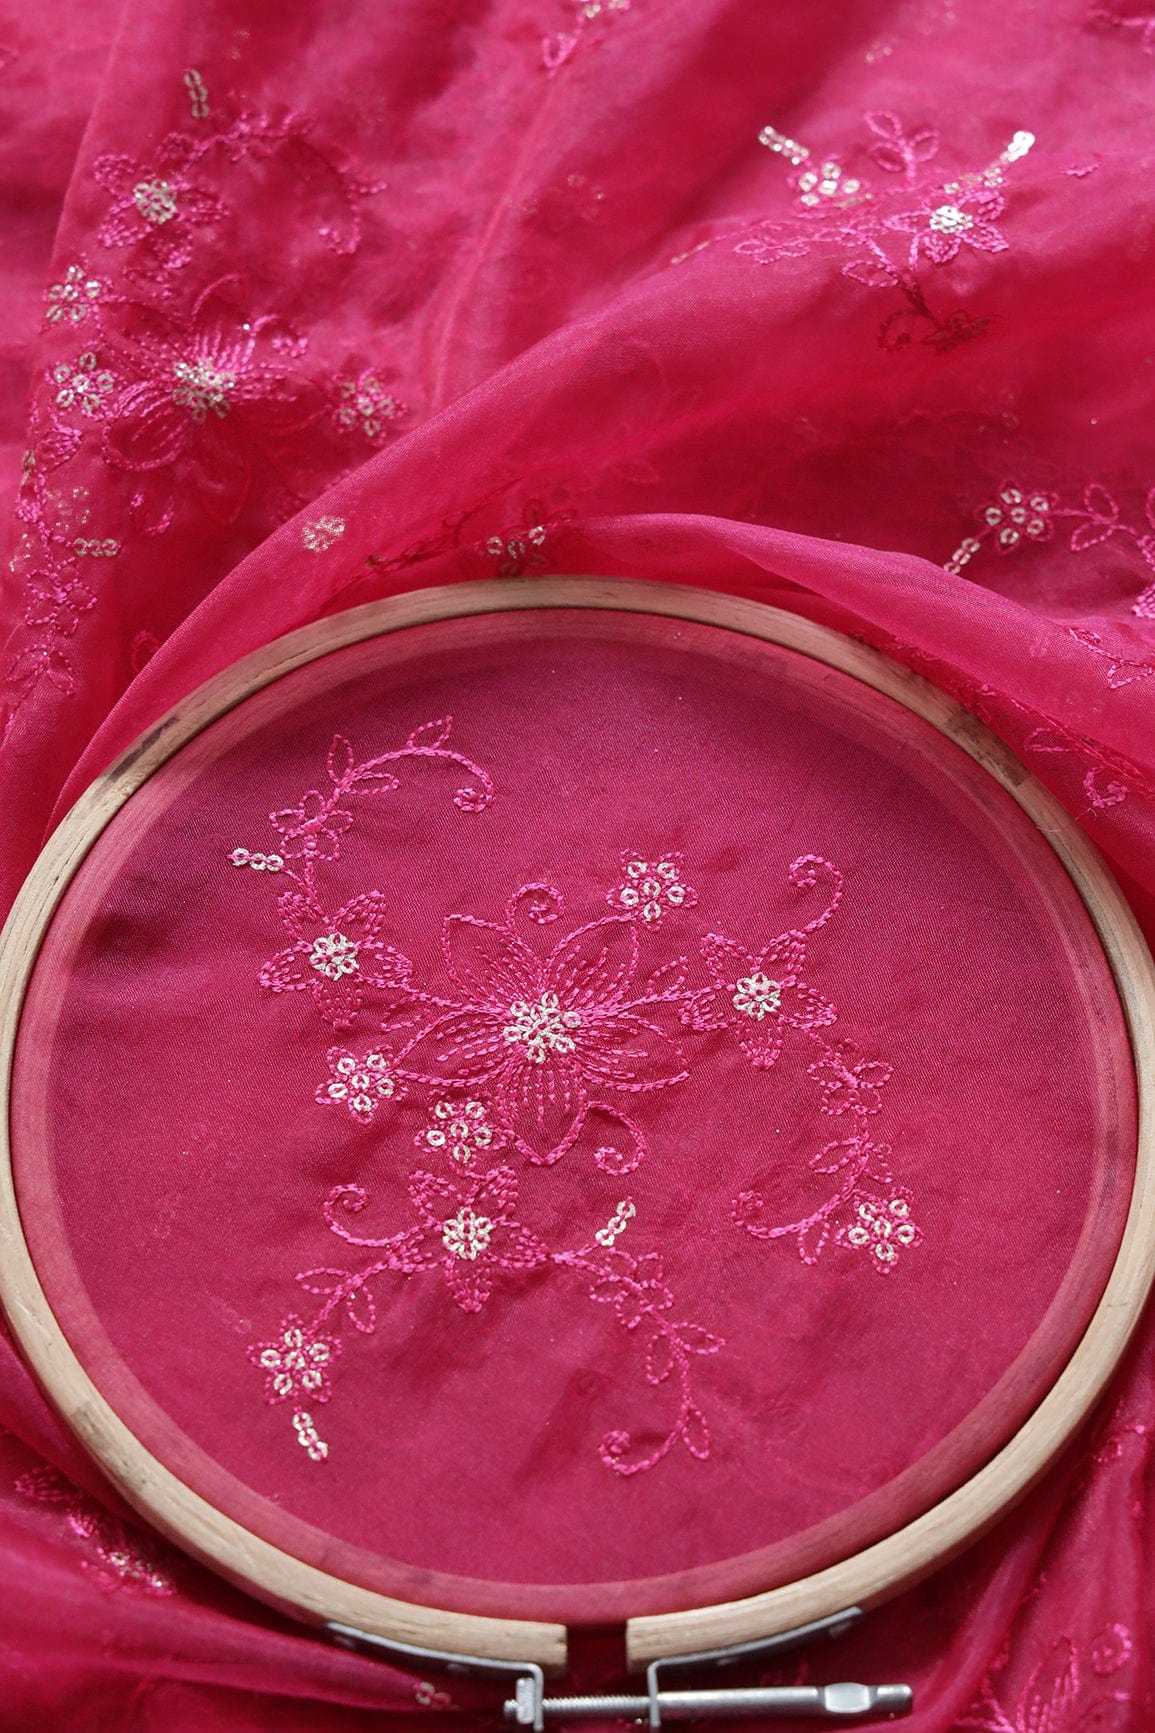 doeraa Embroidery Fabrics Dark Pink Thread With Gold Sequins Embroidery Work On Fuchsia Organza Fabric